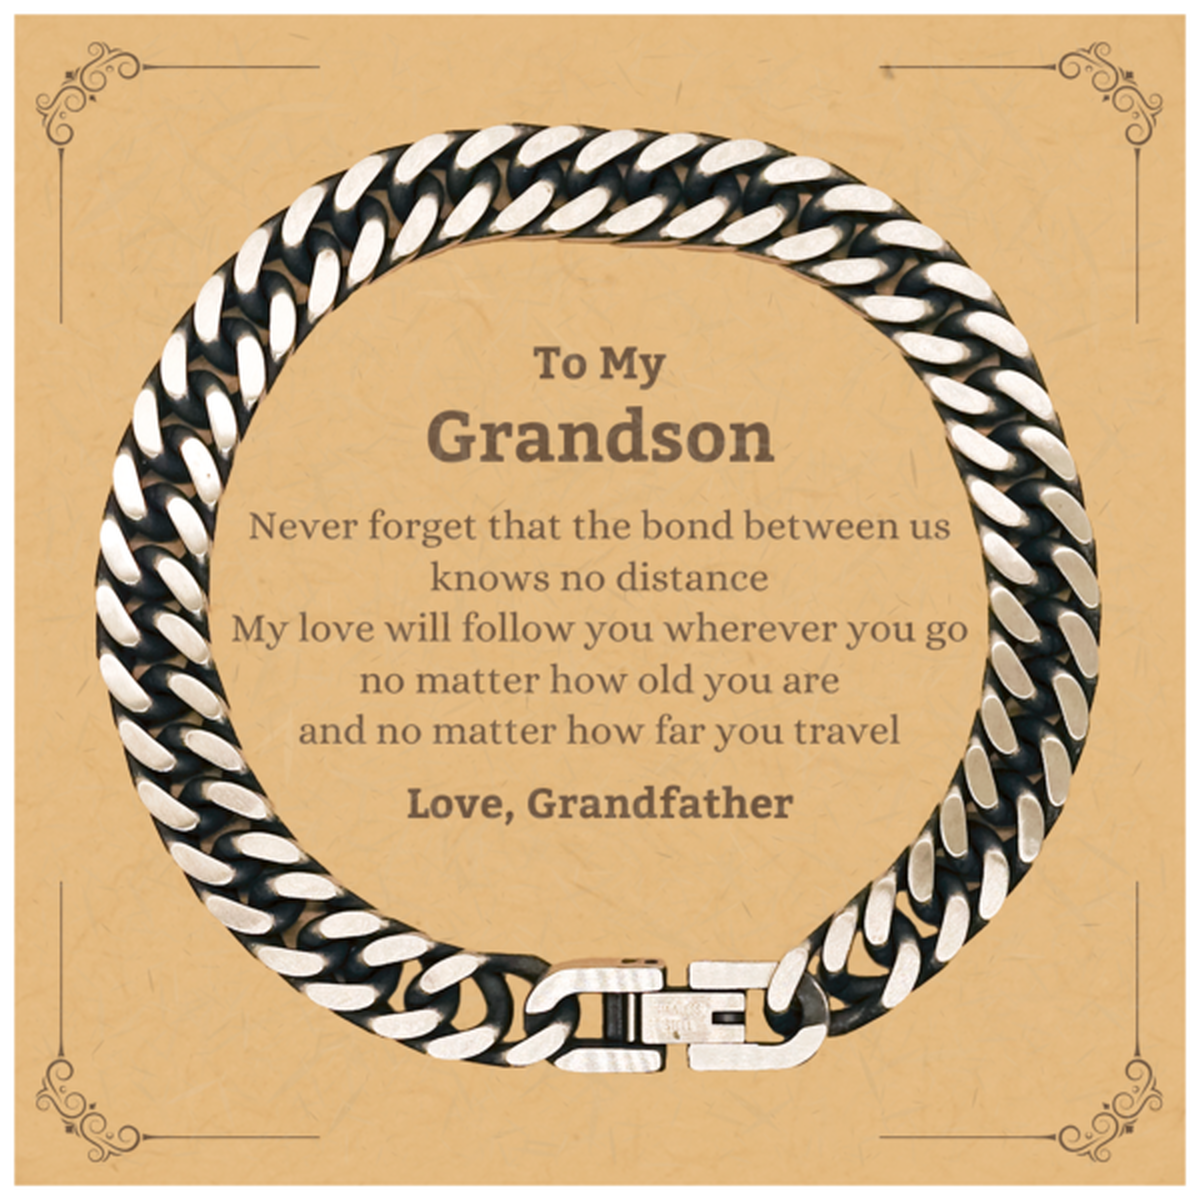 Grandson Birthday Gifts from Grandfather, Adjustable Cuban Link Chain Bracelet for Grandson Christmas Graduation Unique Gifts Grandson Never forget that the bond between us knows no distance. Love, Grandfather